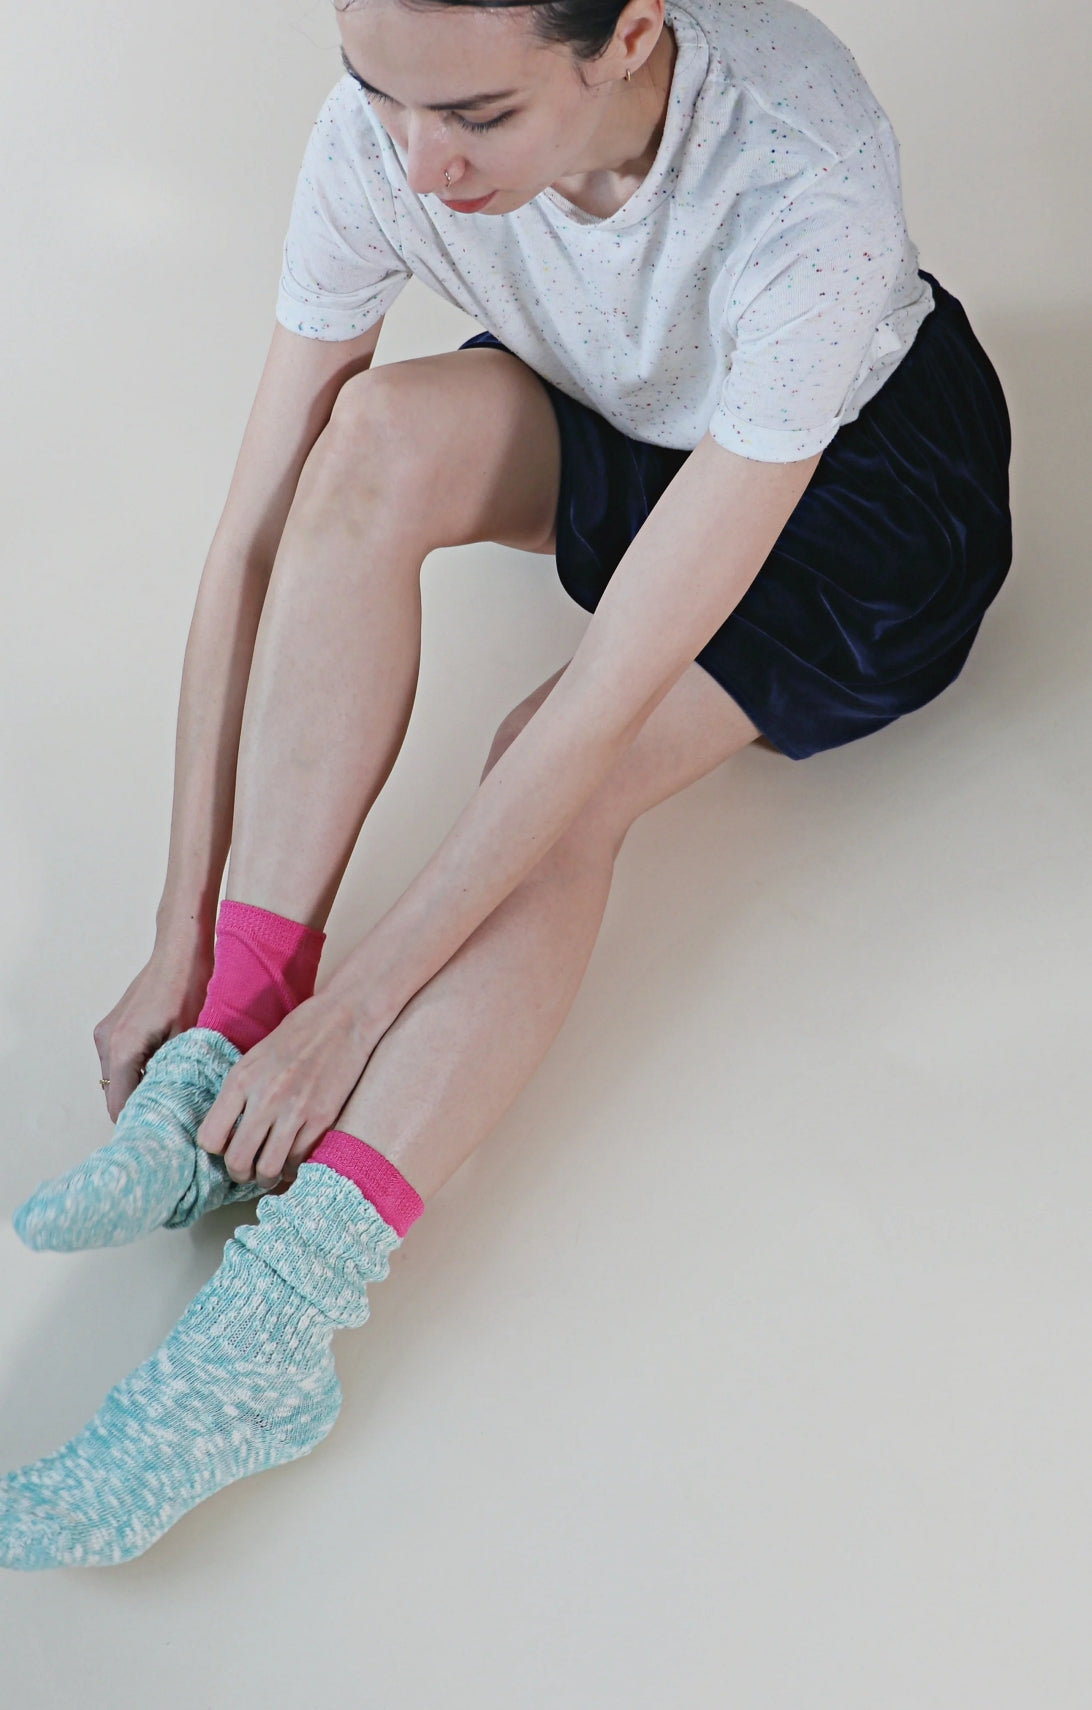 Woman sitting and double wearing the pink color of TABBISOCKS brand Washable 100% Finest Silk Toe Liner Socks with light blue socks